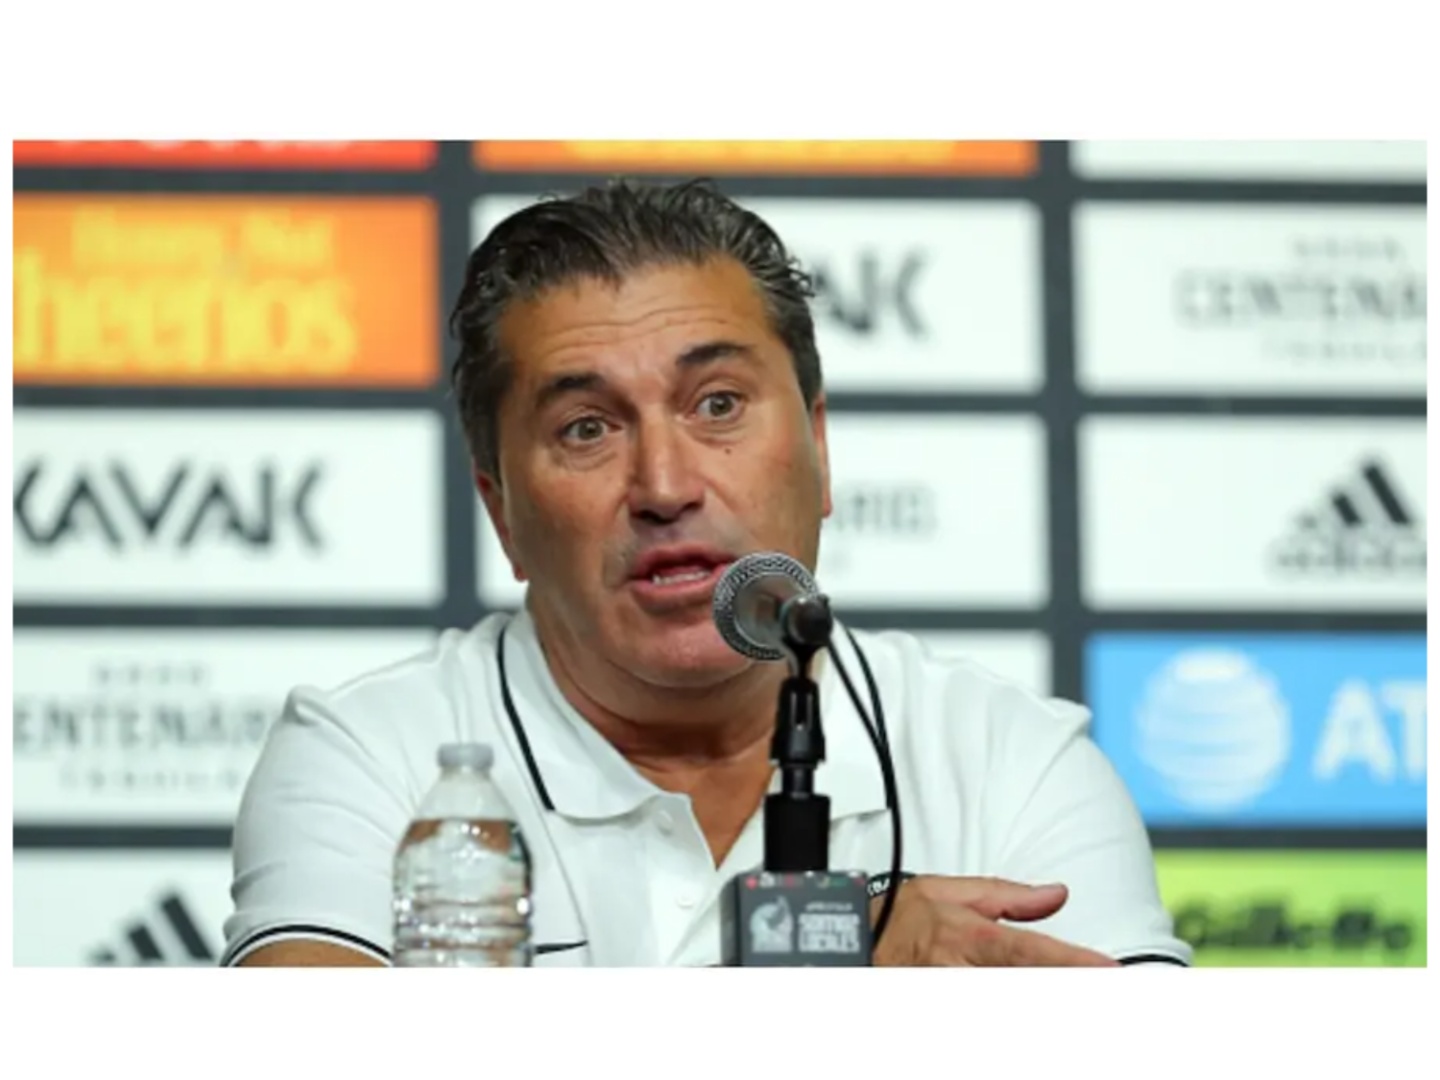 AFCON 2023: Peseiro confirms Yusuf will miss Cote d’Ivoire clash